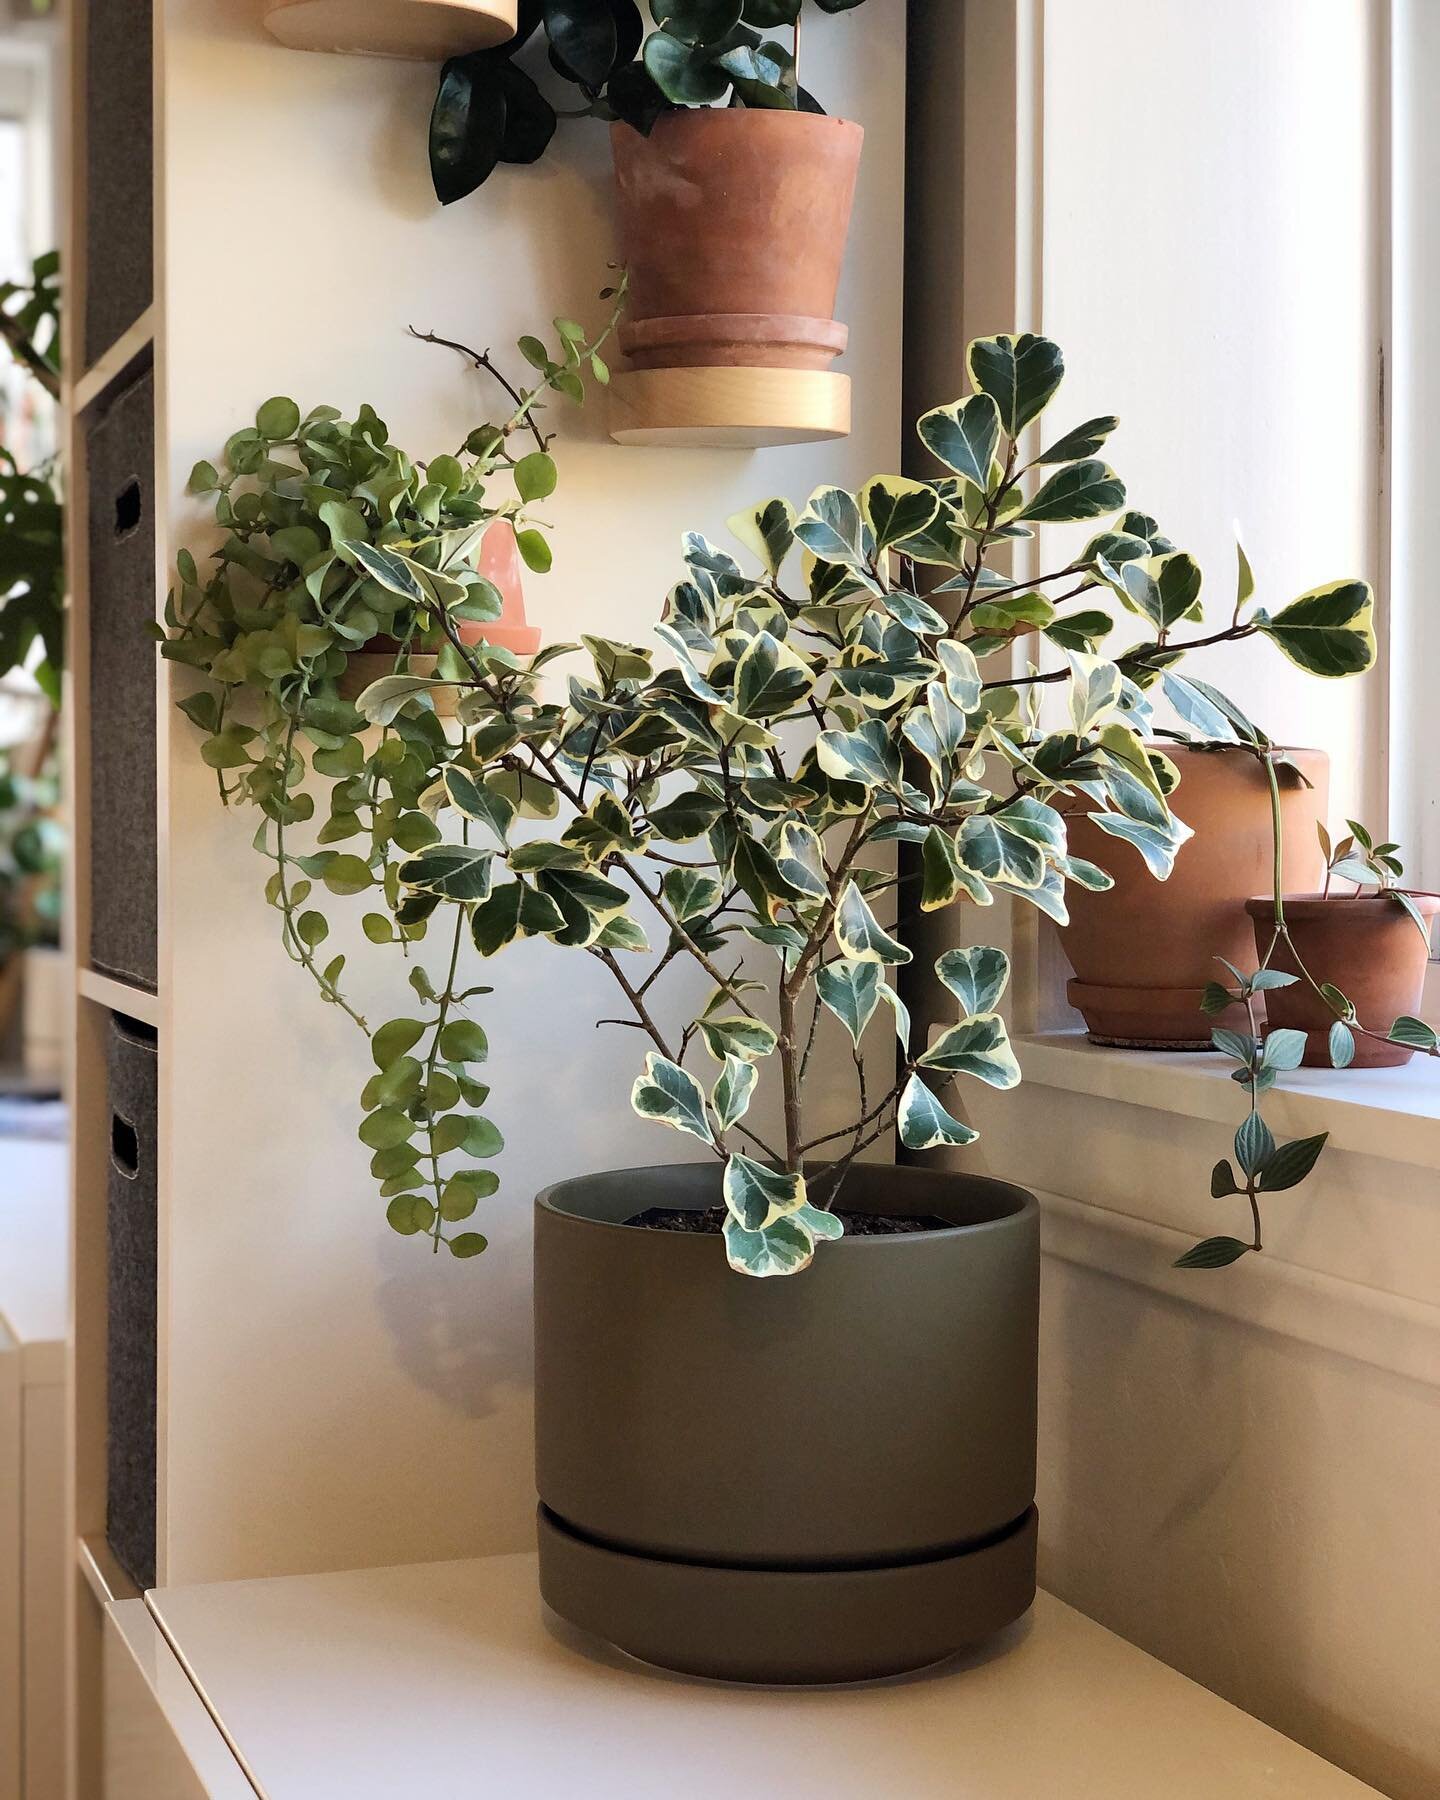 Happy #ficusfriday! Meet my new variegated Ficus triangularis, hanging out in my new @lbe.design Round 2 size 8 in Olive 😍 (thank you Veronica and Jon!). Swipe 👉🏼 for close-up 🎥. Funny how my recent plant purchases have all been in the Ficus genu